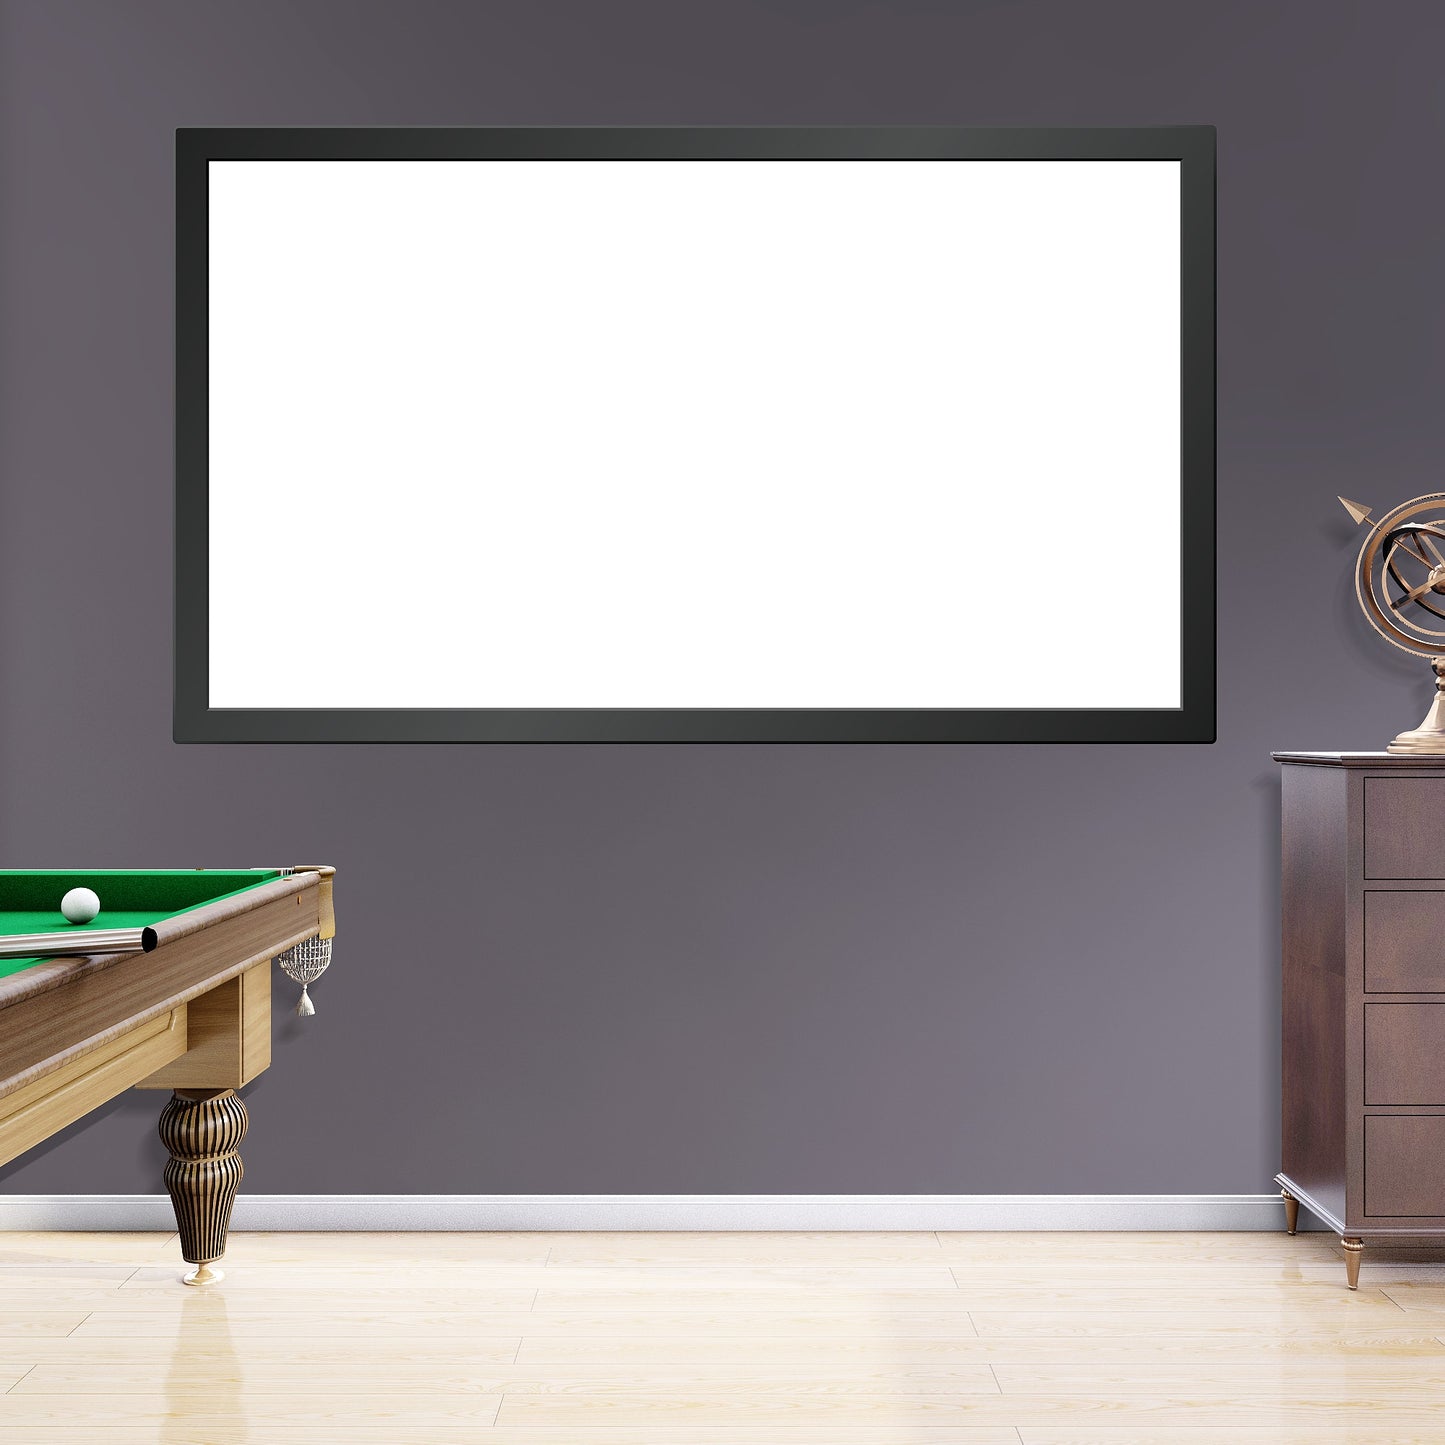 Projection Screen: Fathead Vinyl        -   Removable Wall   Adhesive Decal